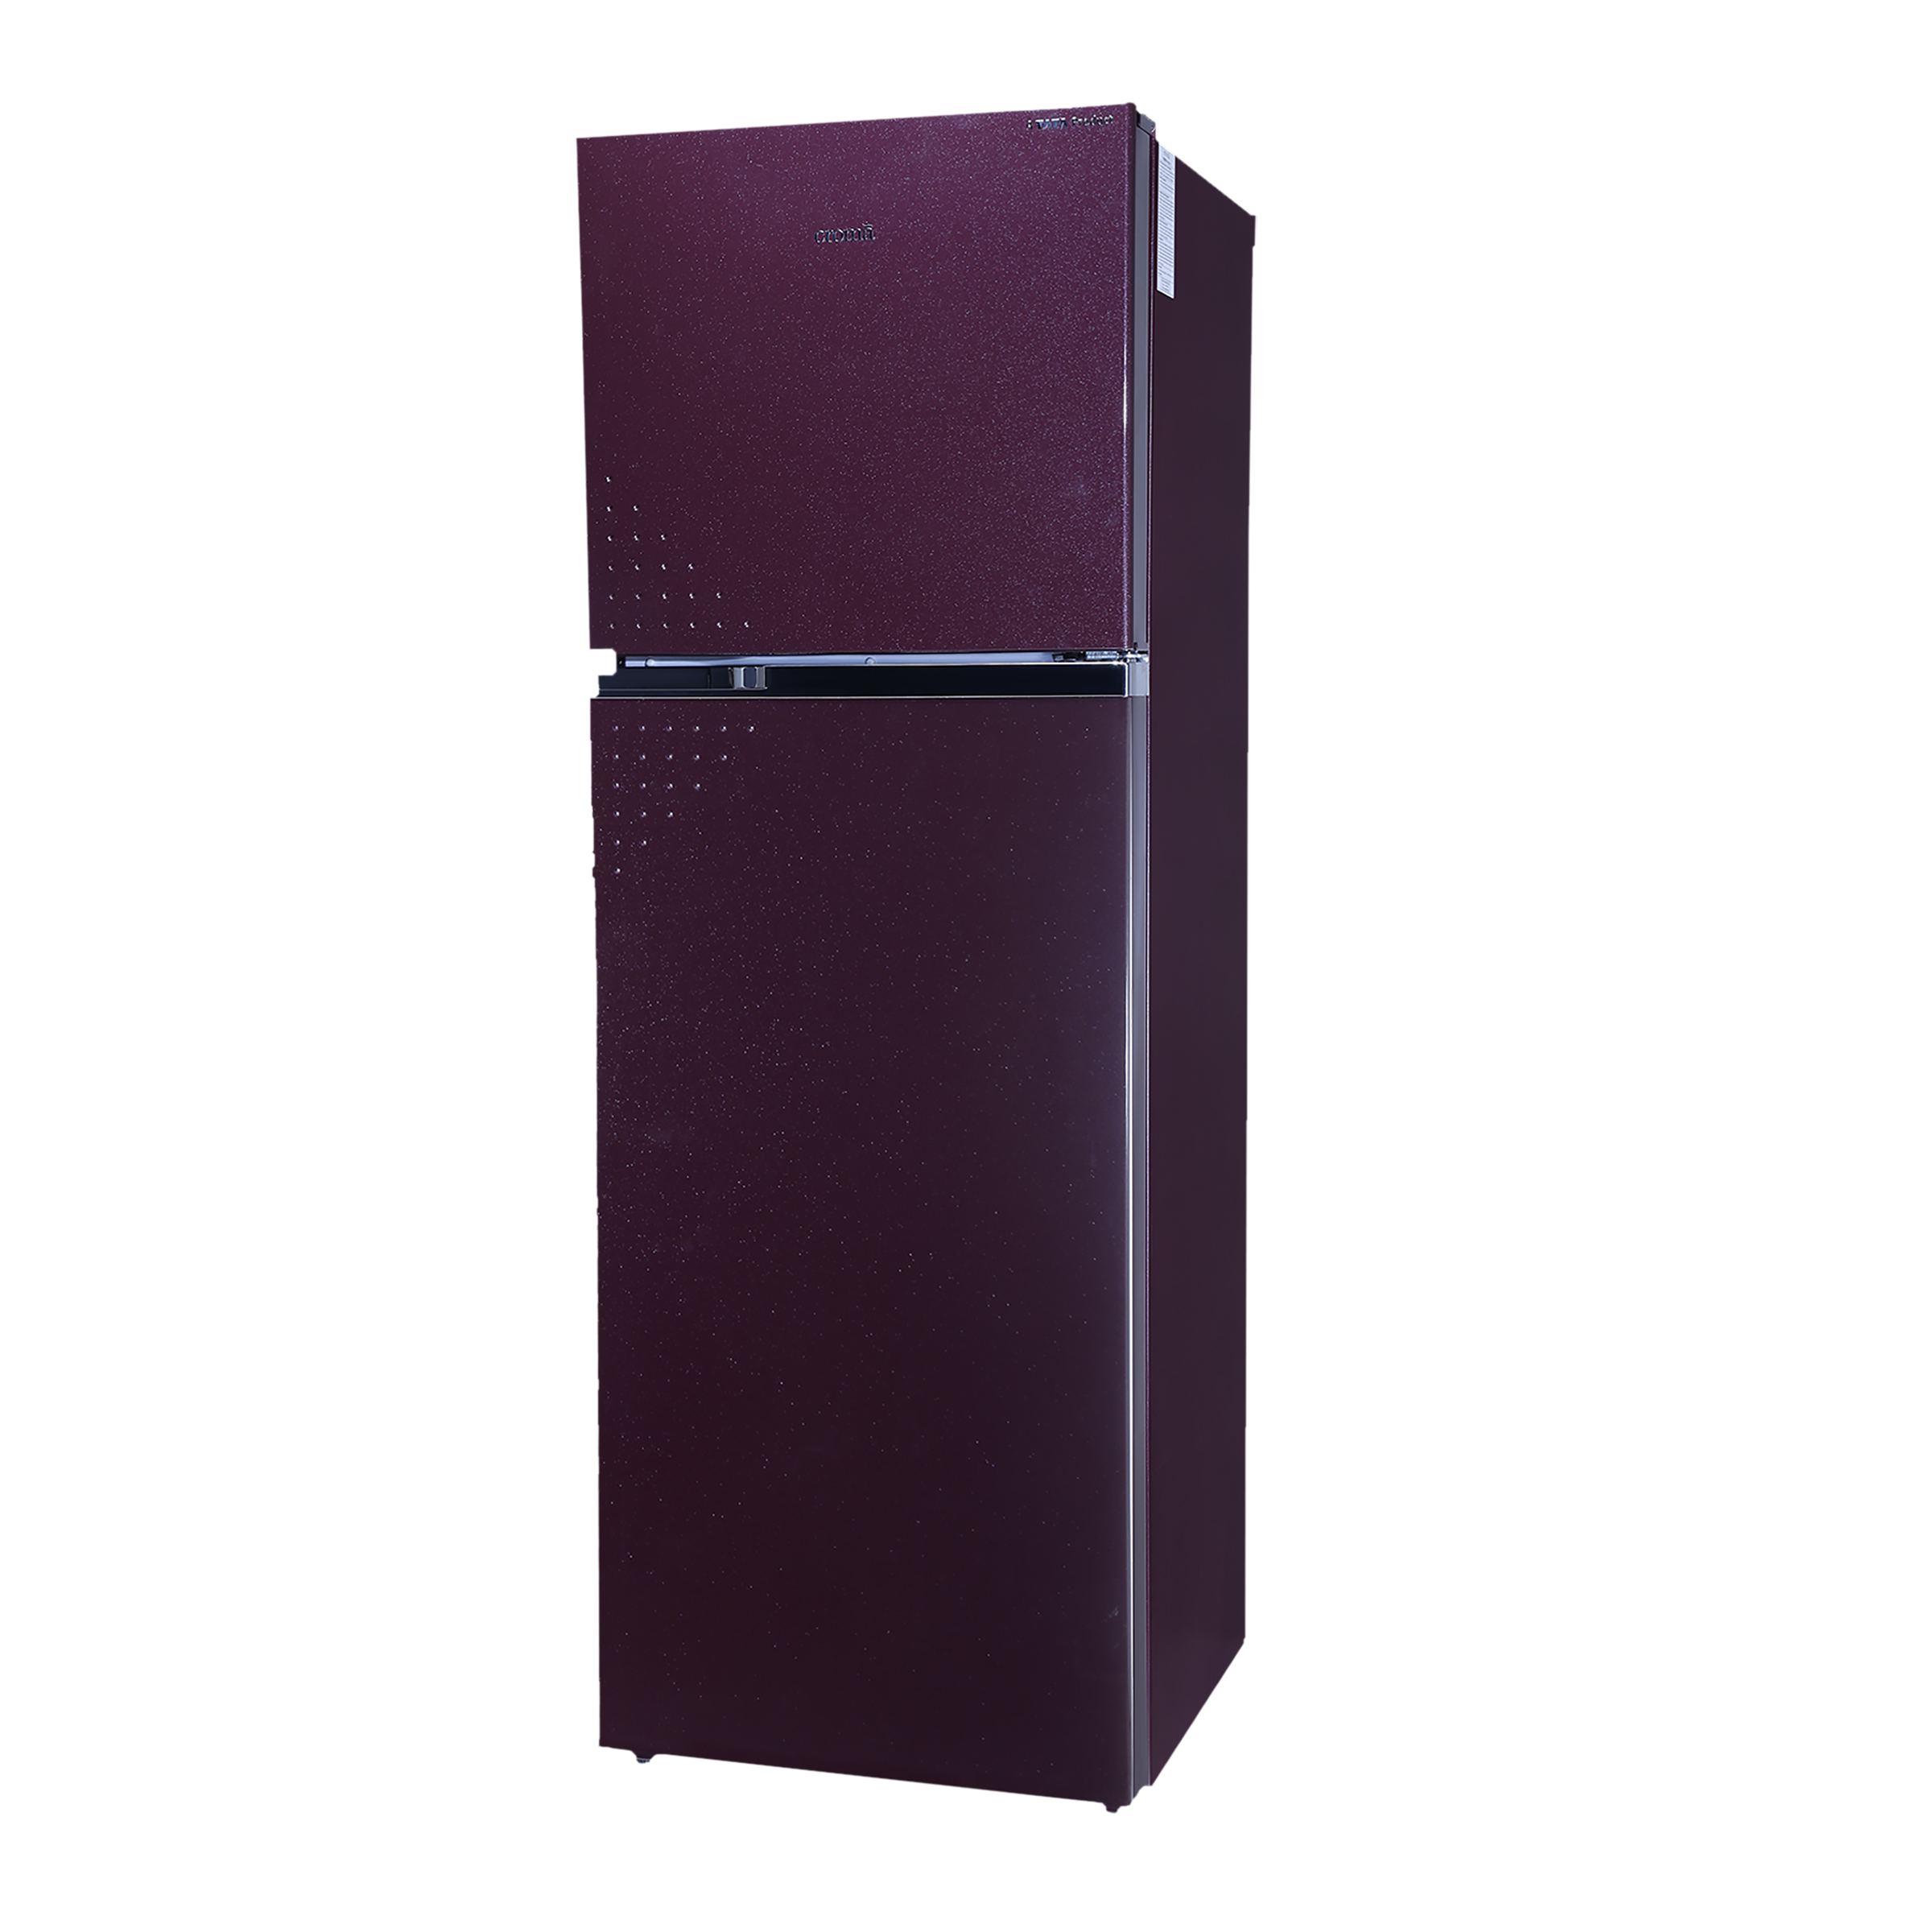 Croma 337 Litres 3 Star Frost Free Double Door Refrigerator with Large Vegetable Basket (CRLR340FFD259609, Wine Red)_4